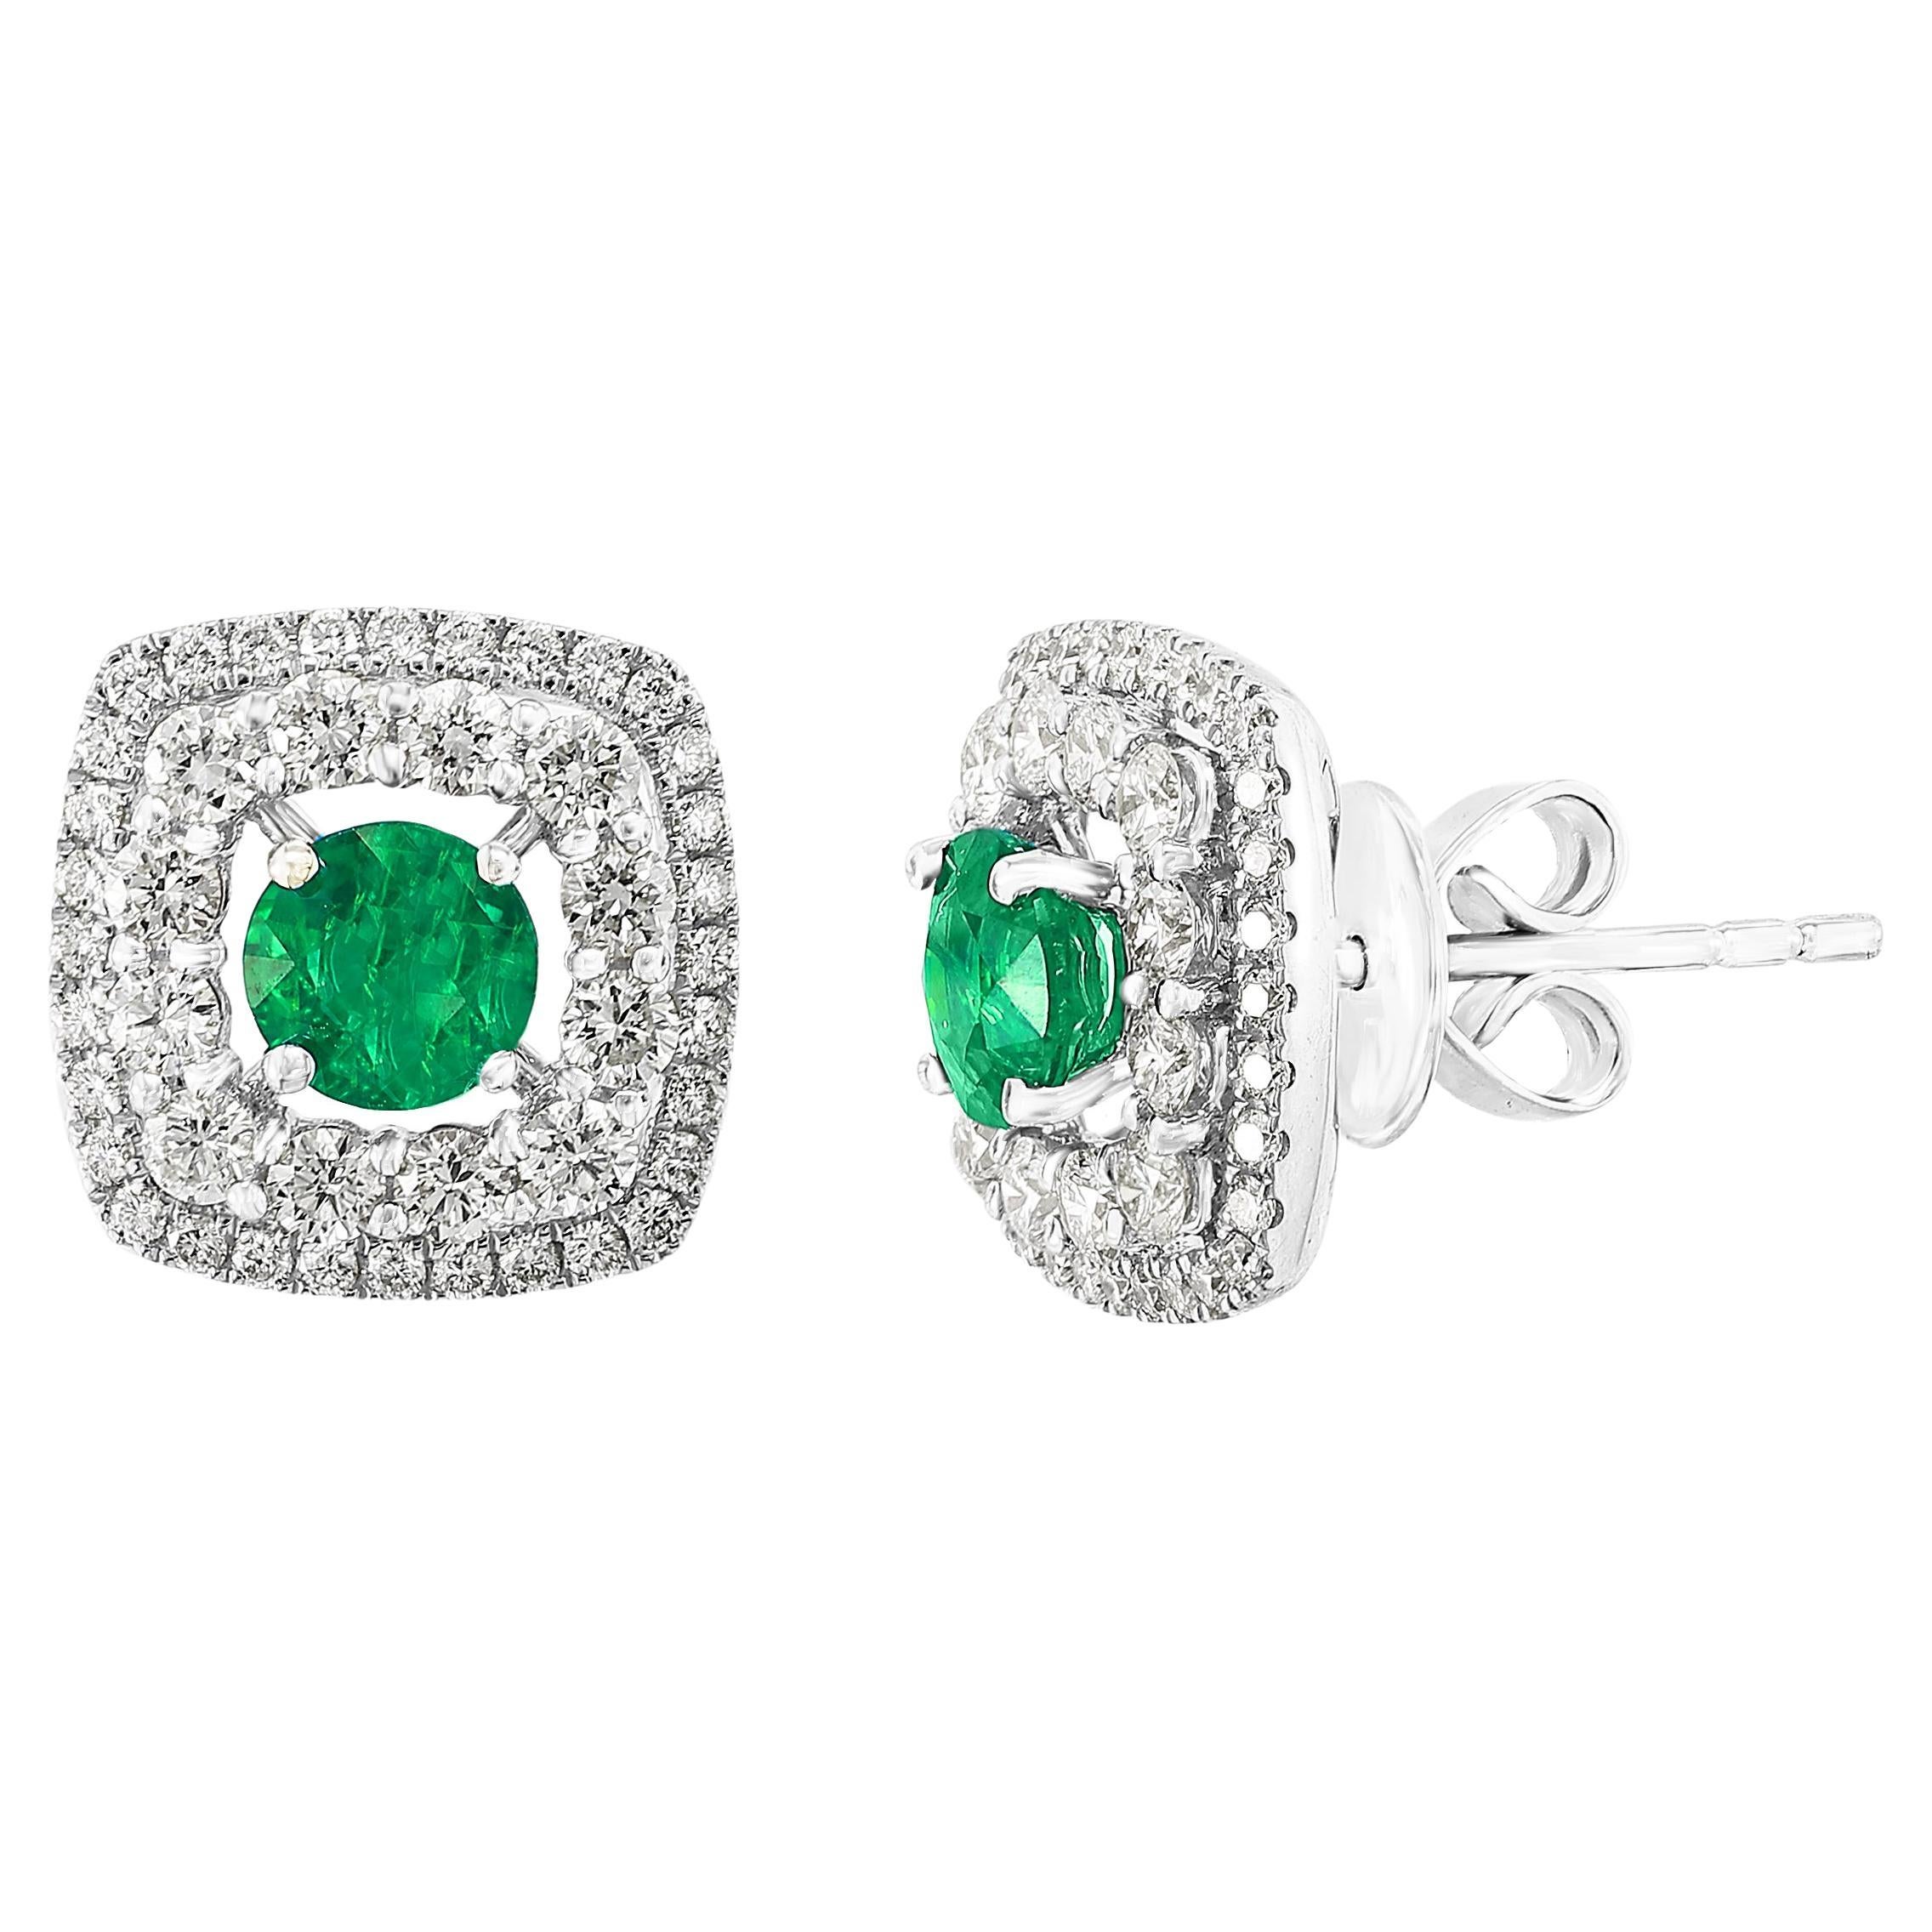 0.73 Carat Round Cut Emerald and Diamond Stud Earrings in 18K White Gold For Sale